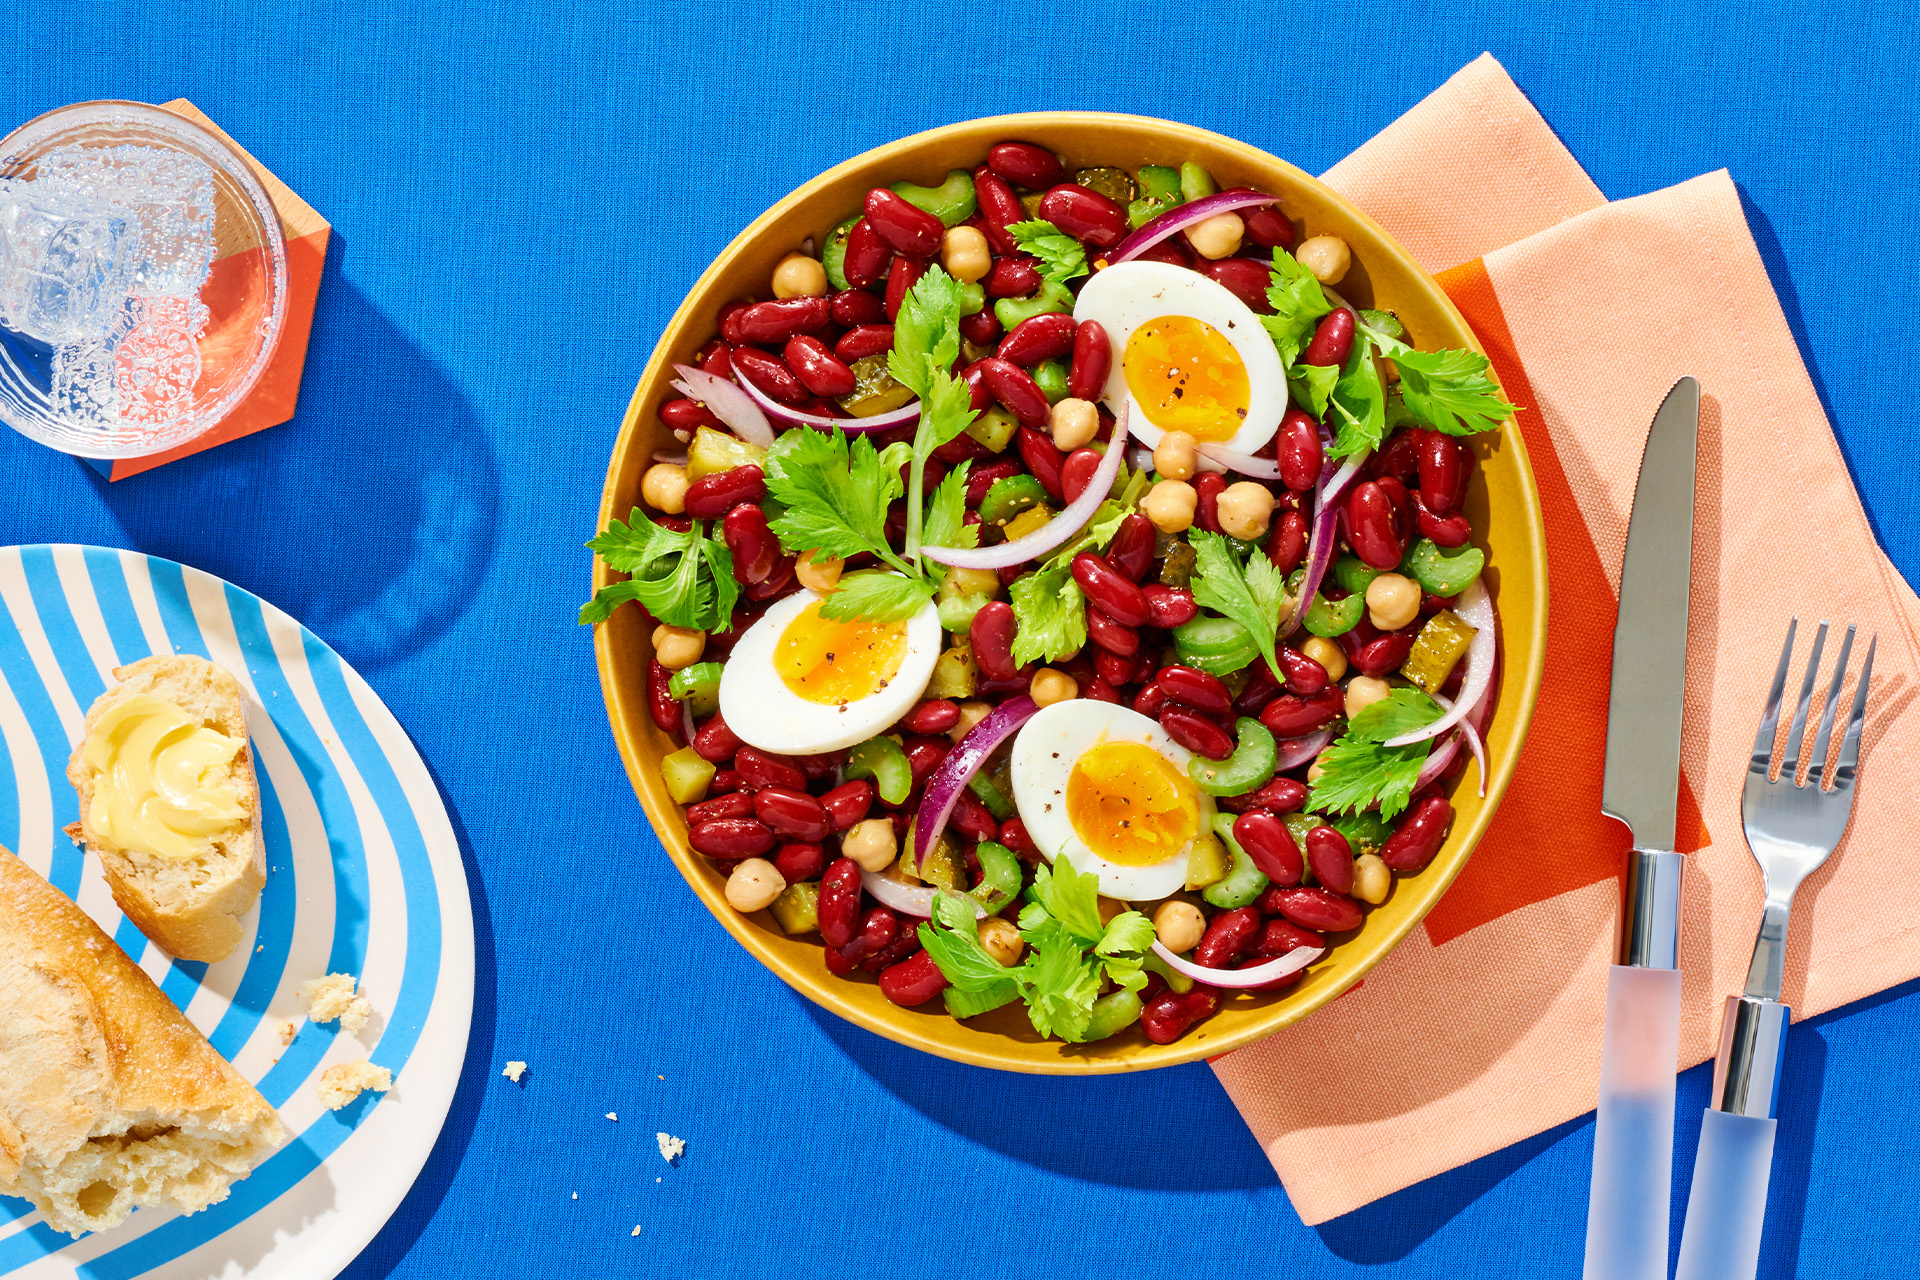 Colorful kidney bean salad with chickpeas, parsley and hard-boiled eggs in yellow bowl